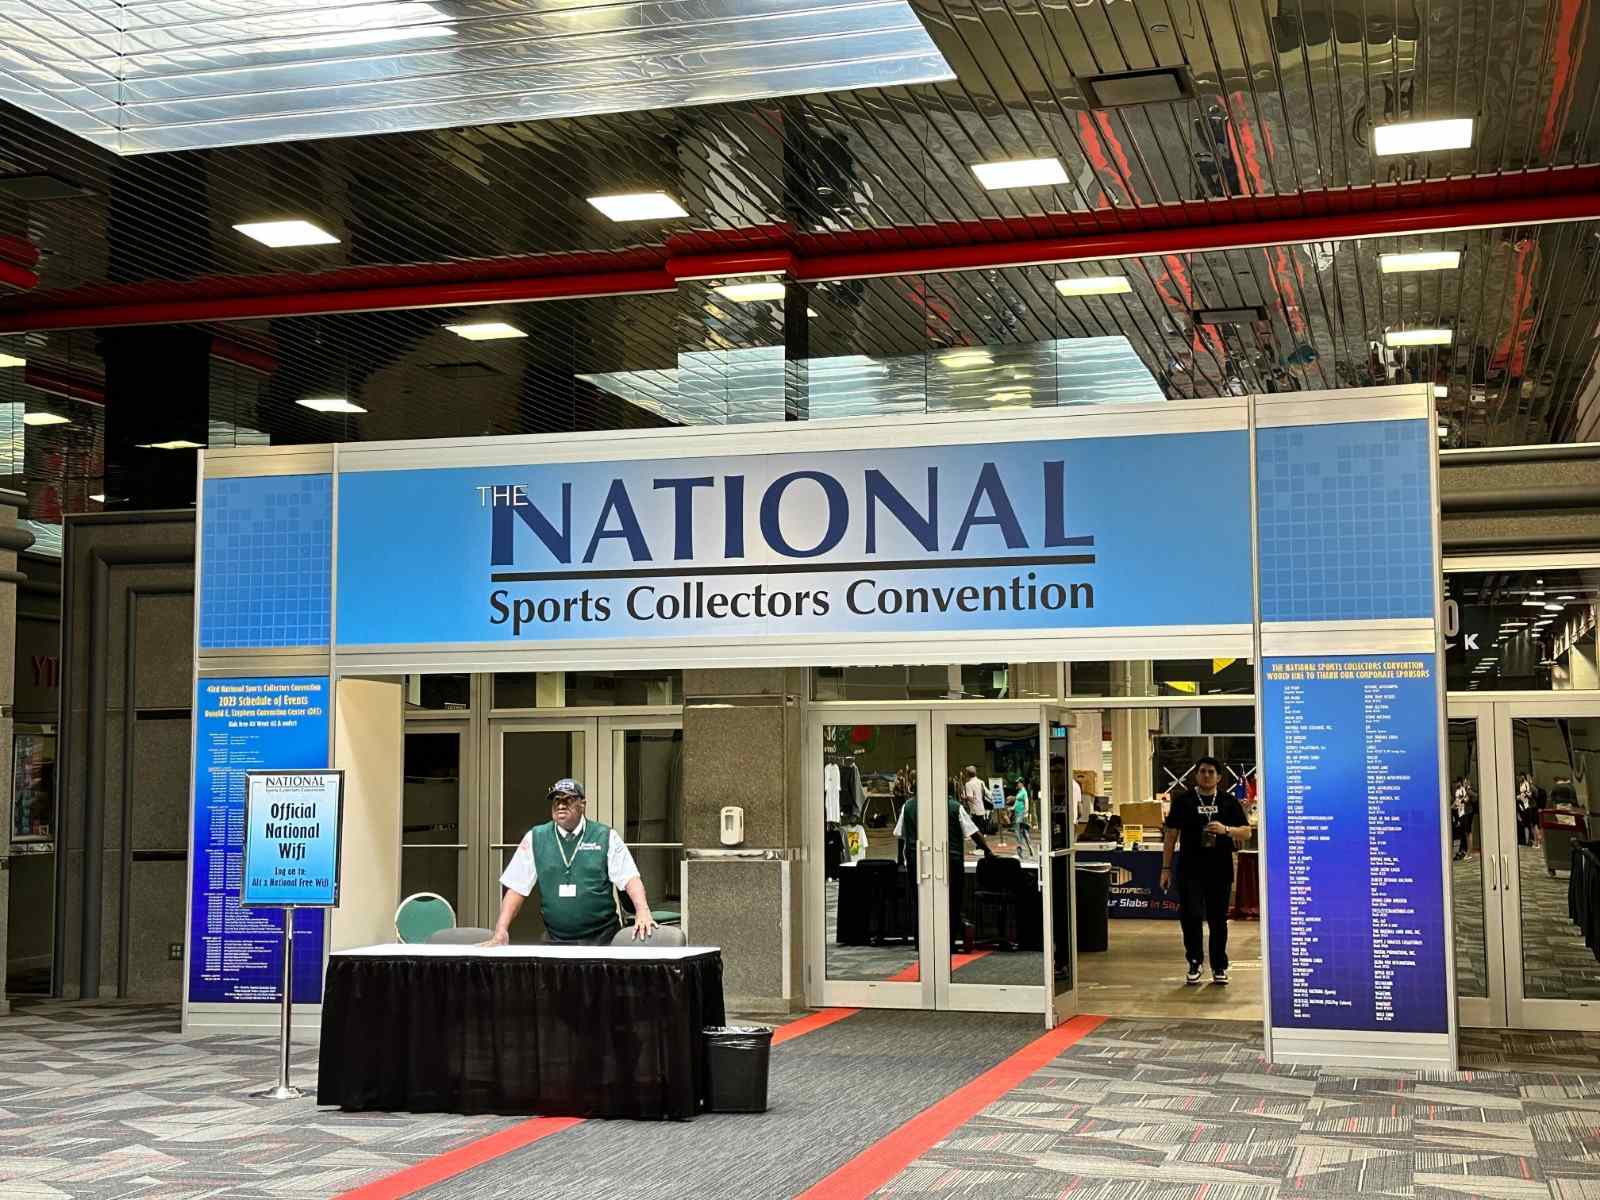 The National Sports Collectors Convention